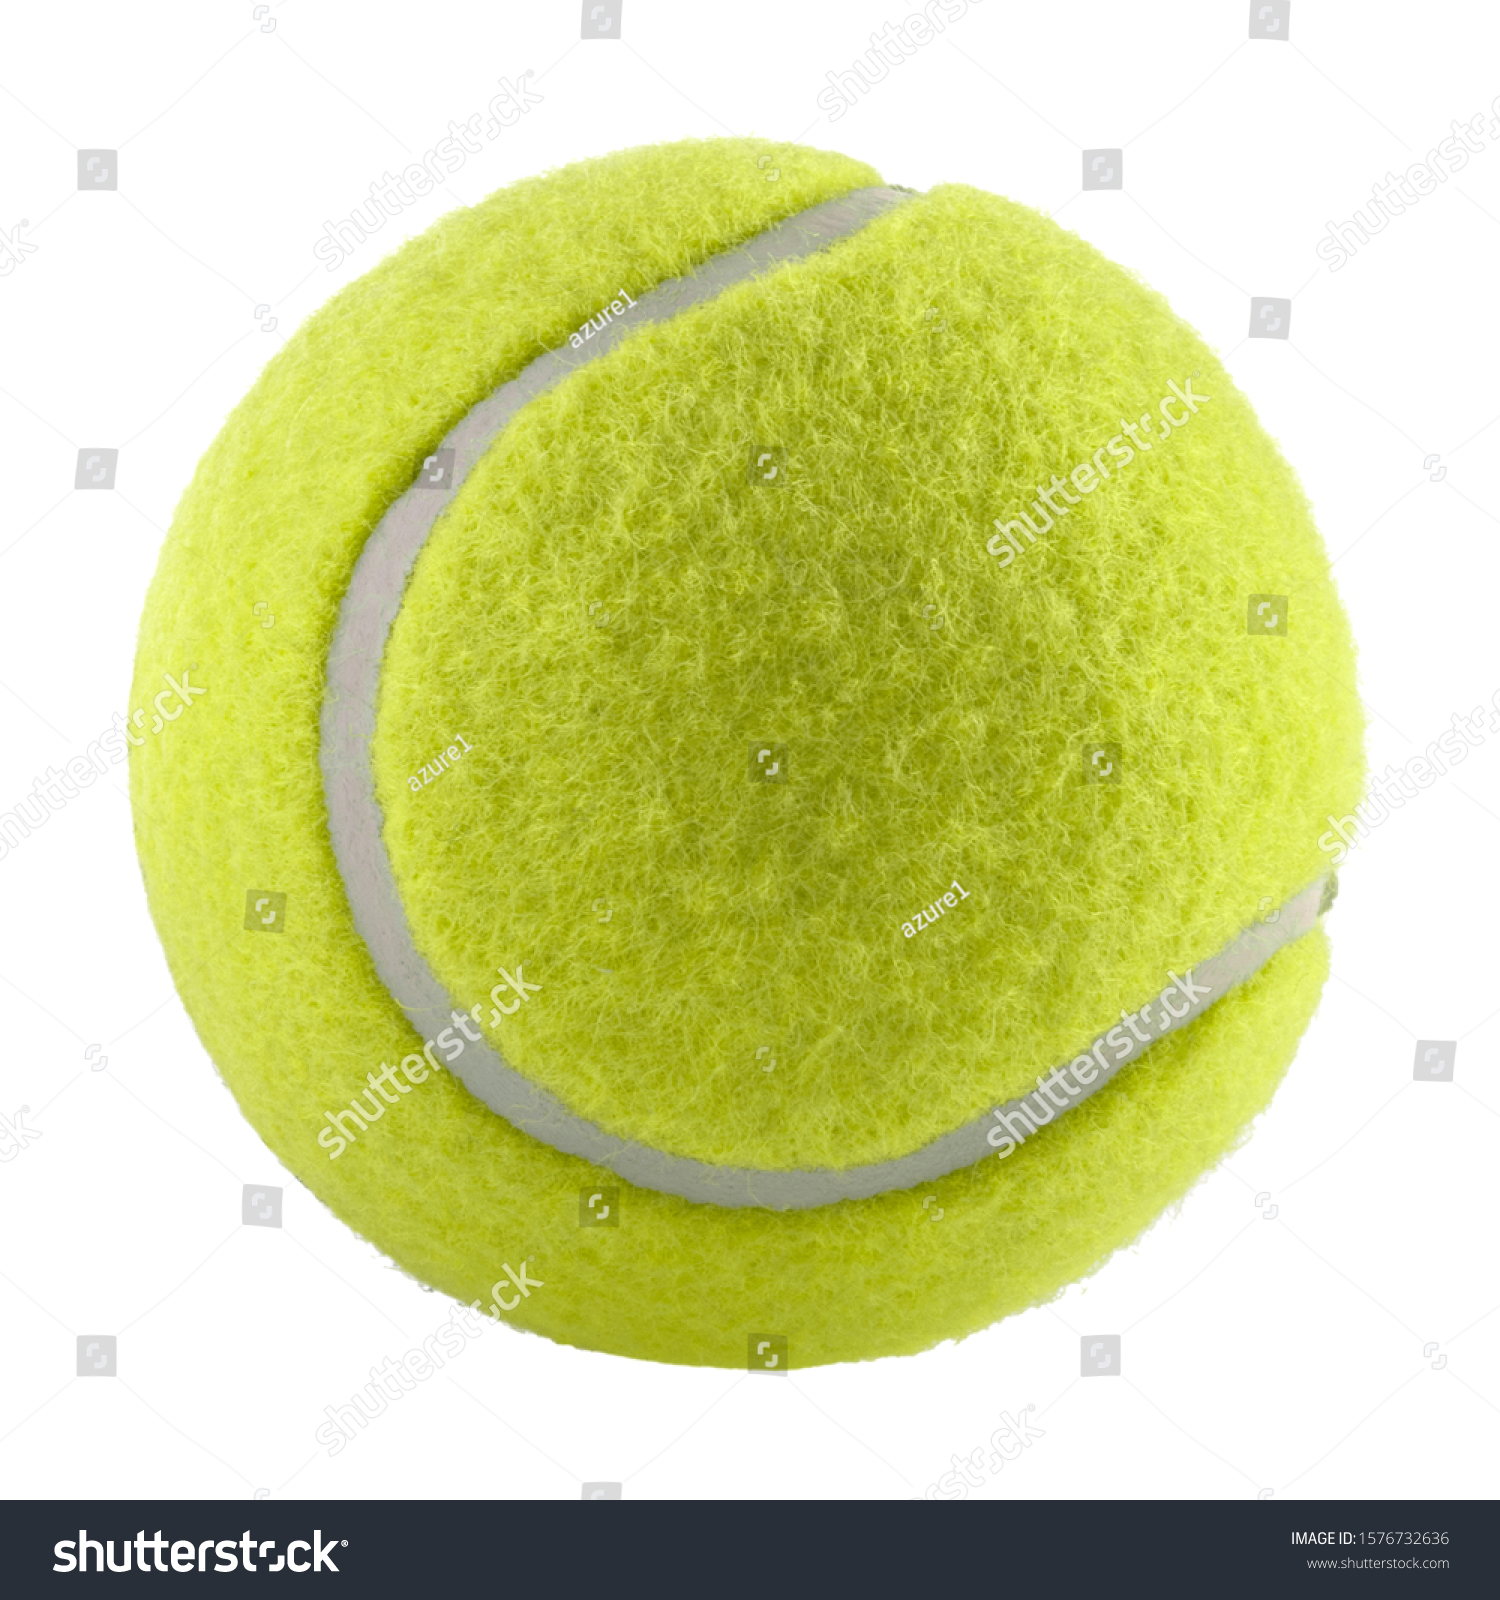 tennis ball isolated without shadow - photography #1576732636